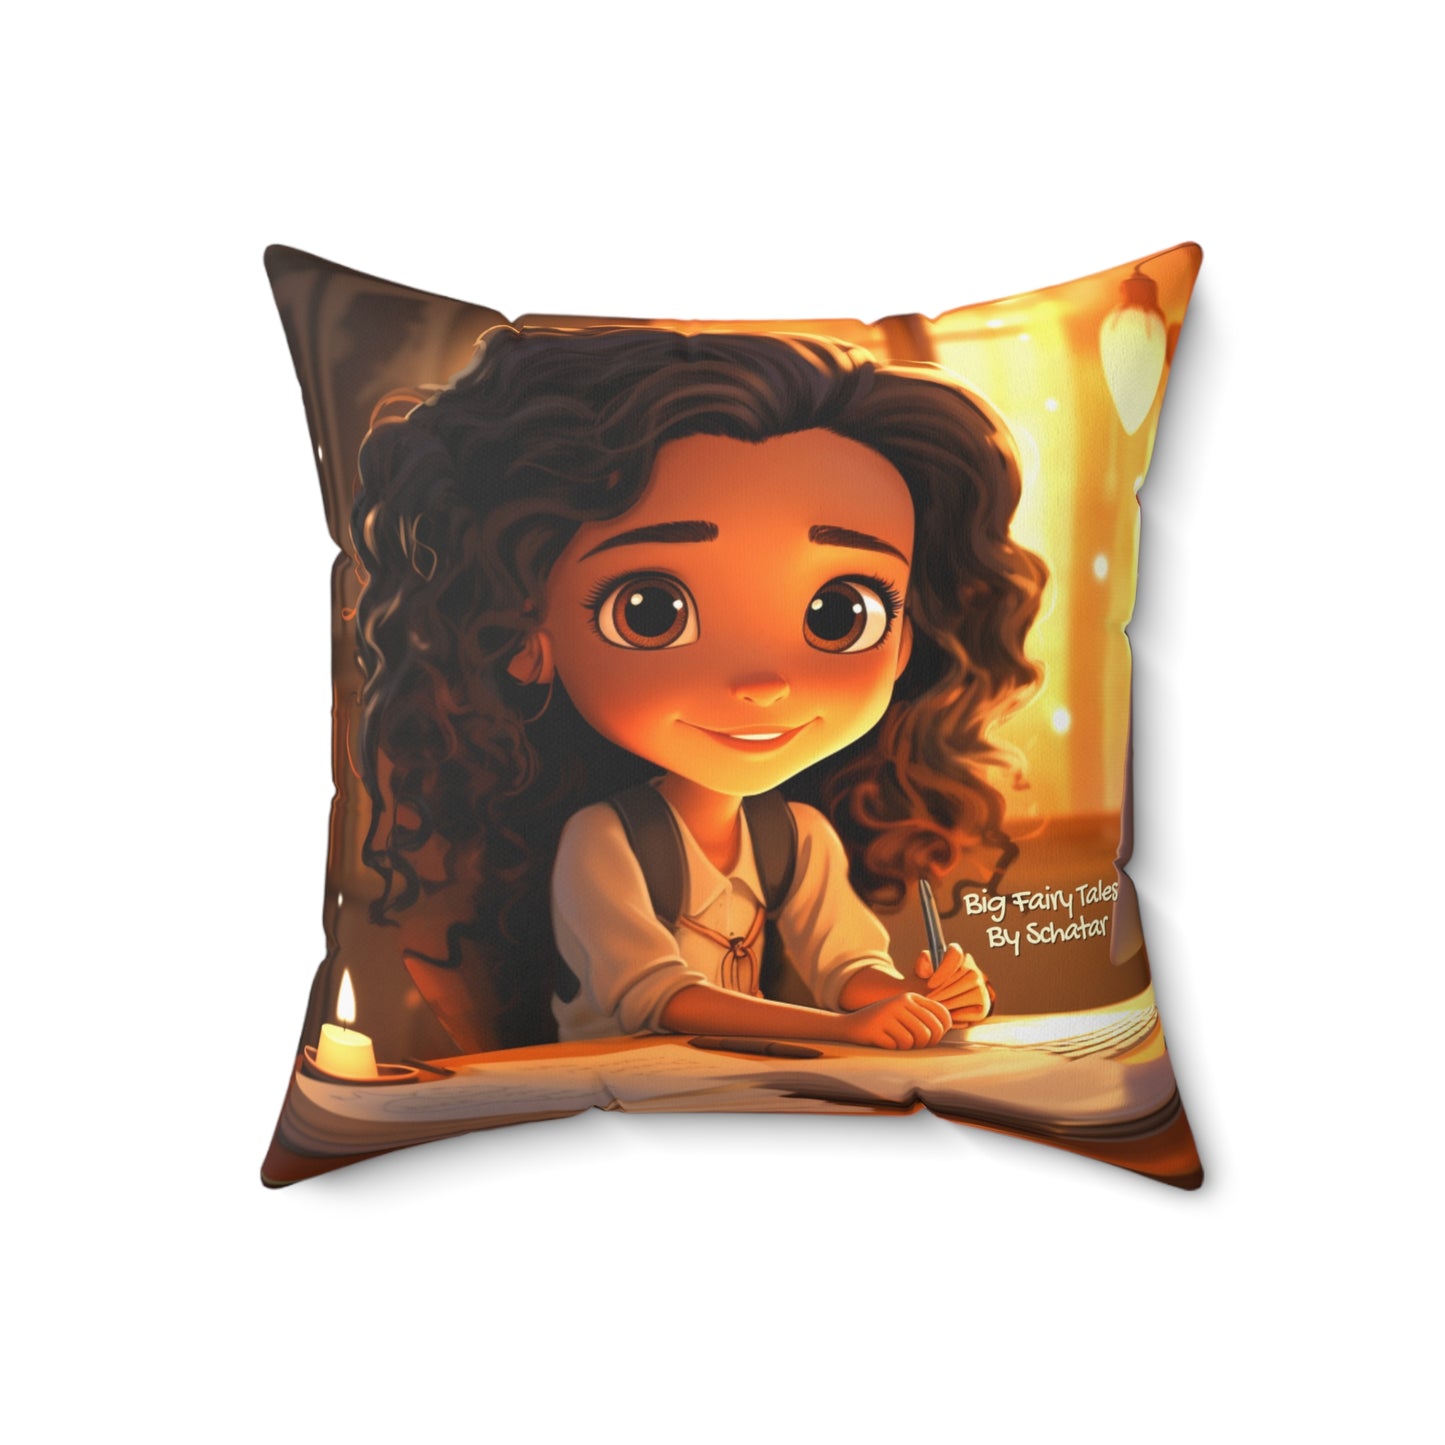 Writer - Big Little Professionals Plush Pillow 8 From Big Fairy Tales By Schatar